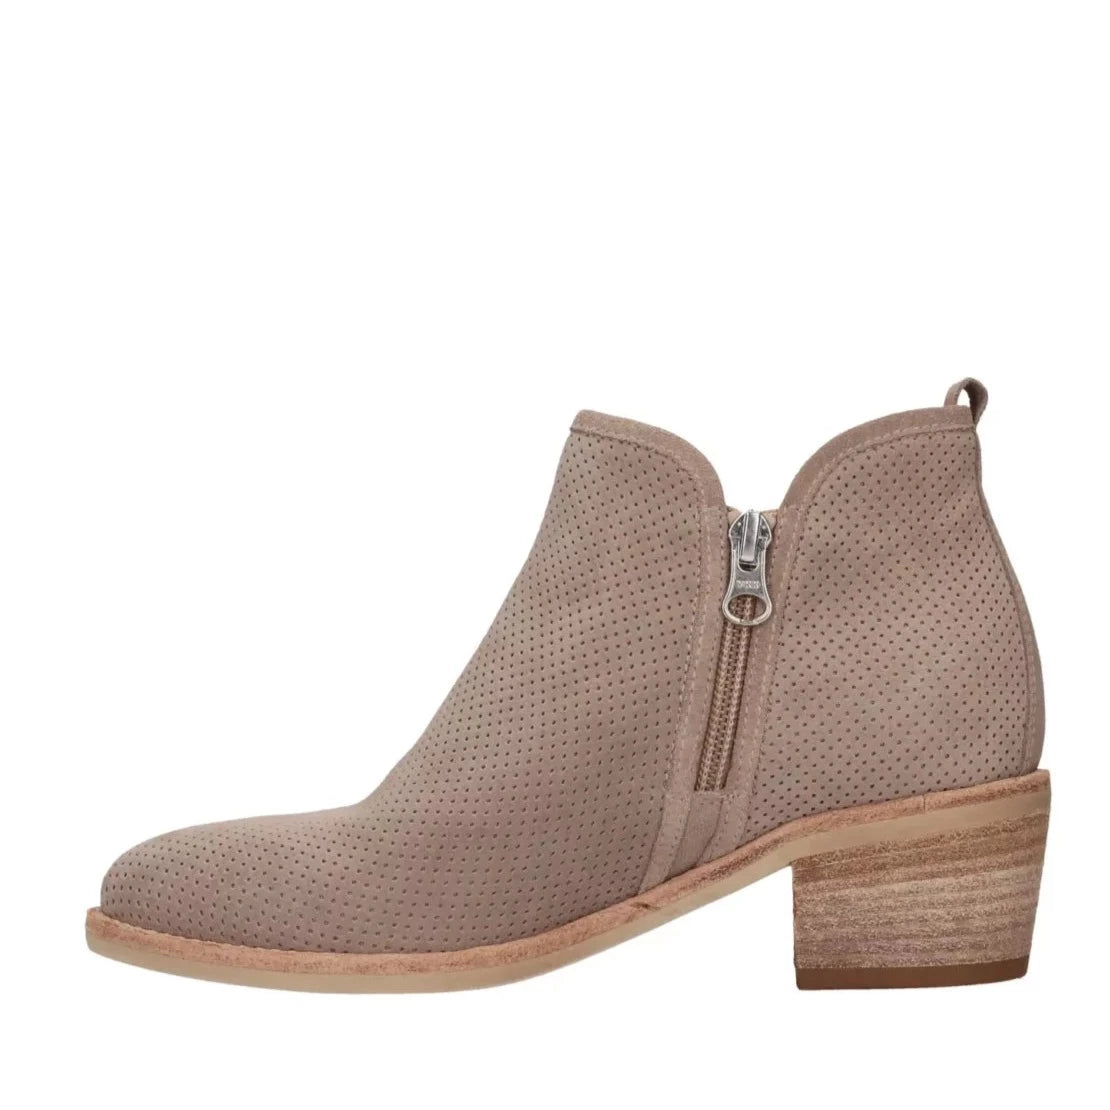 Ankle boots NeroGiardini woman beige suede lateral zip